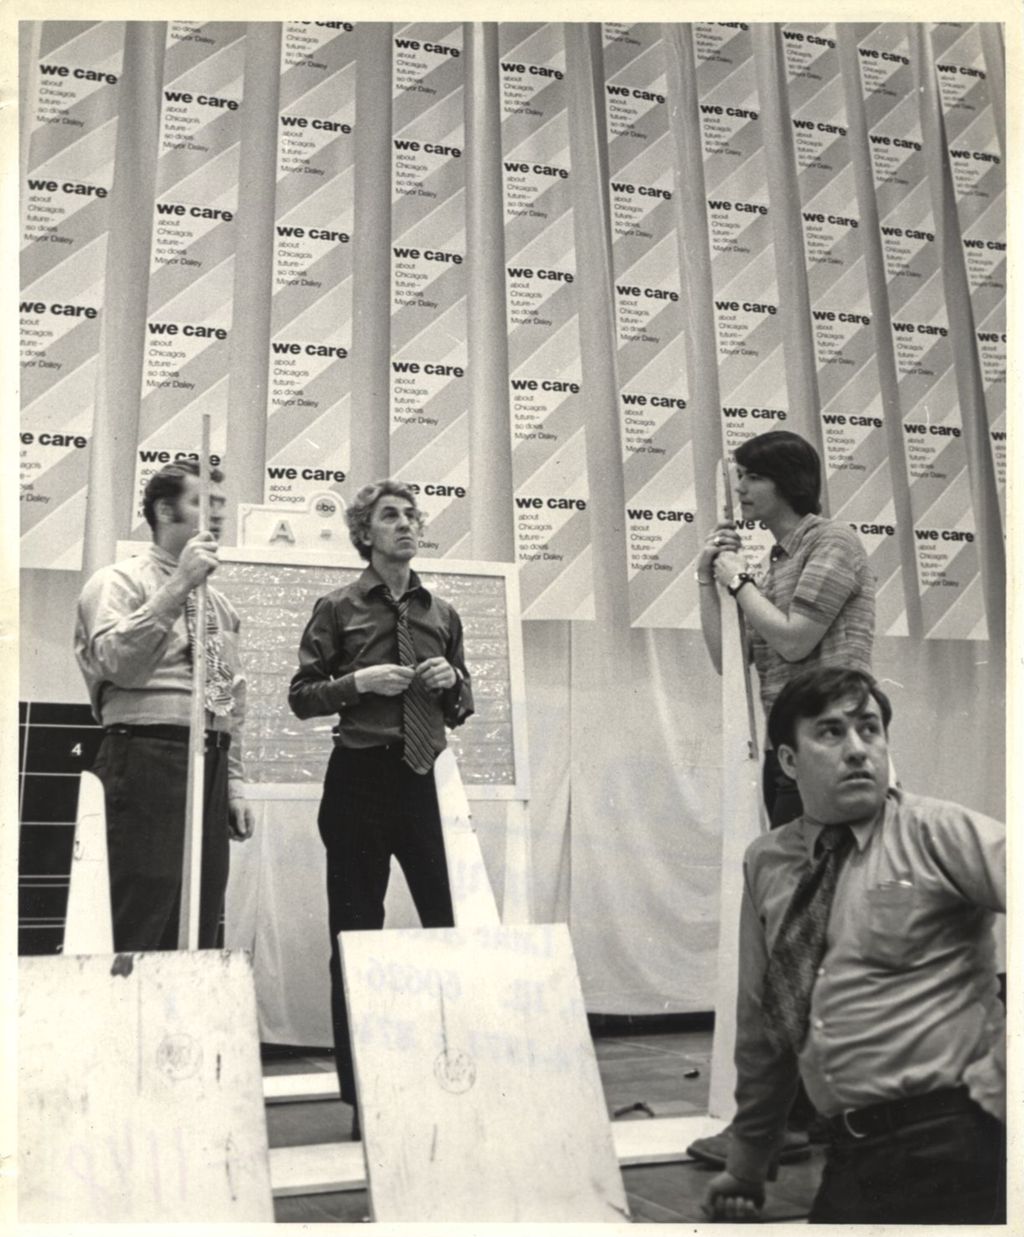 Four men setting up a room for a "We Care" election event